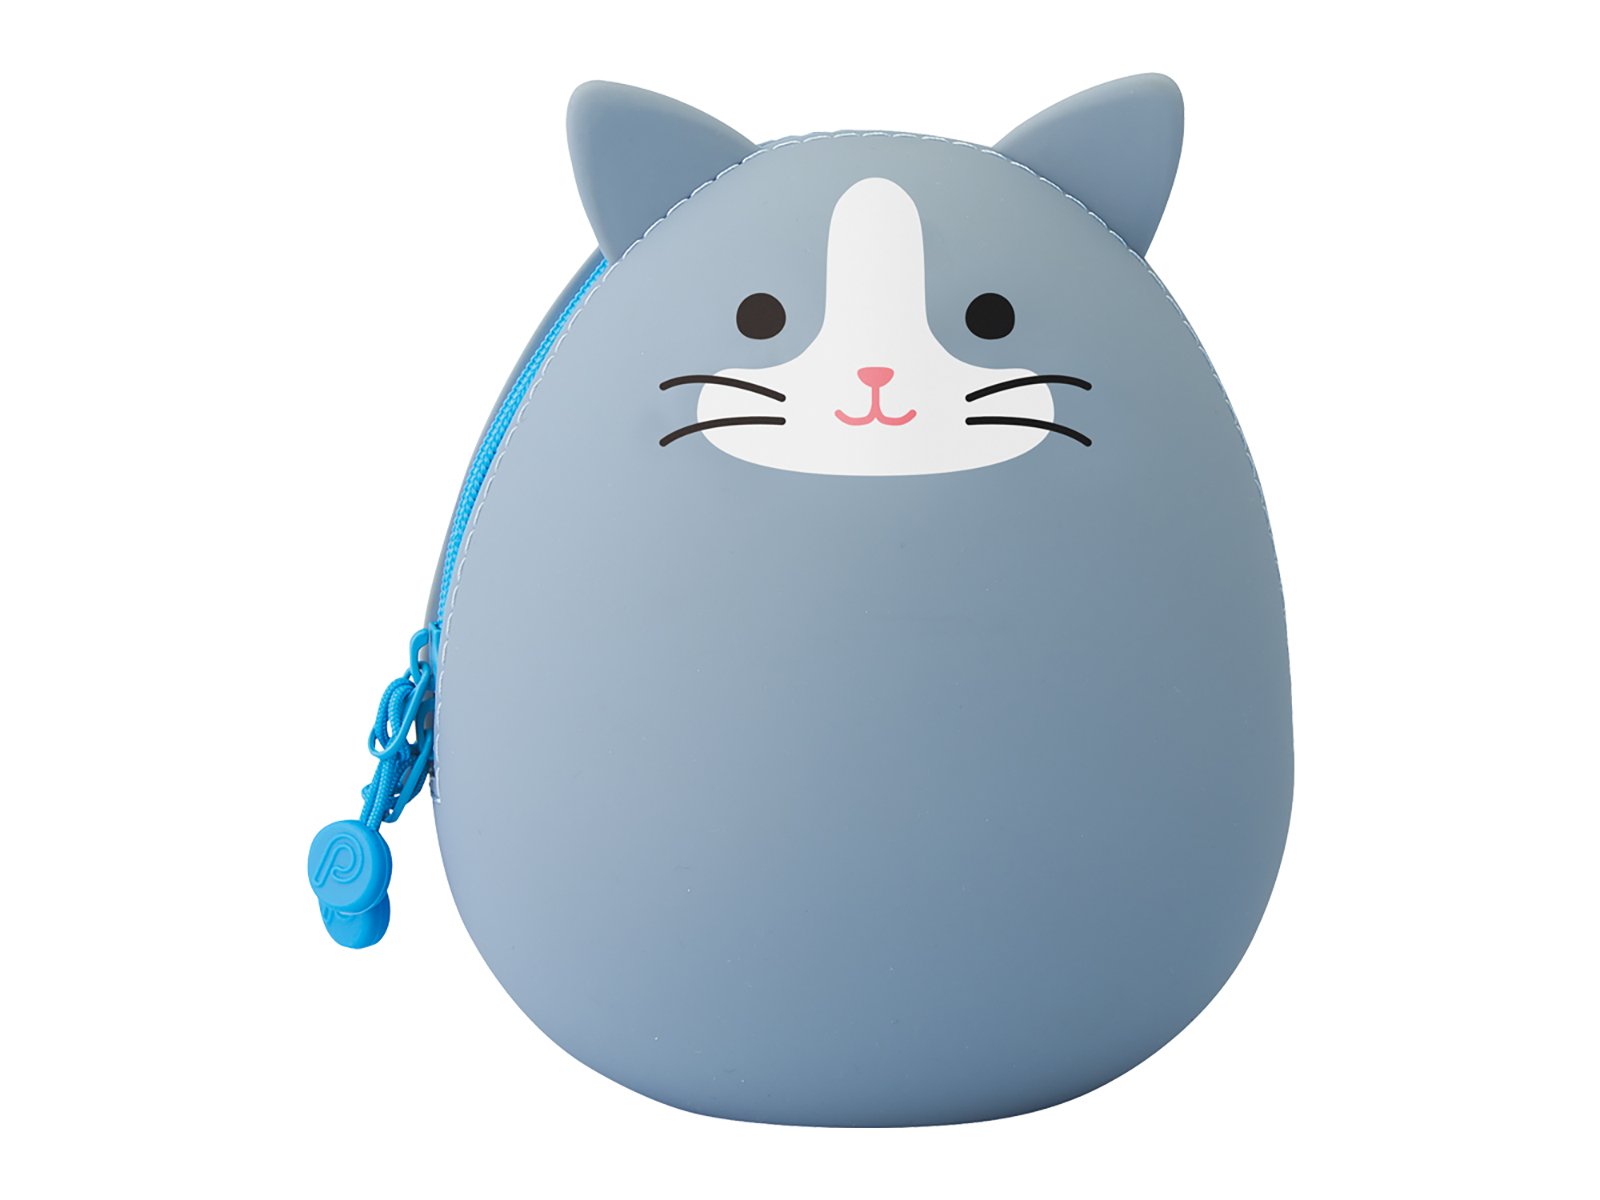 PuniLabo Standing Kitty Egg Pouch (Large) gray